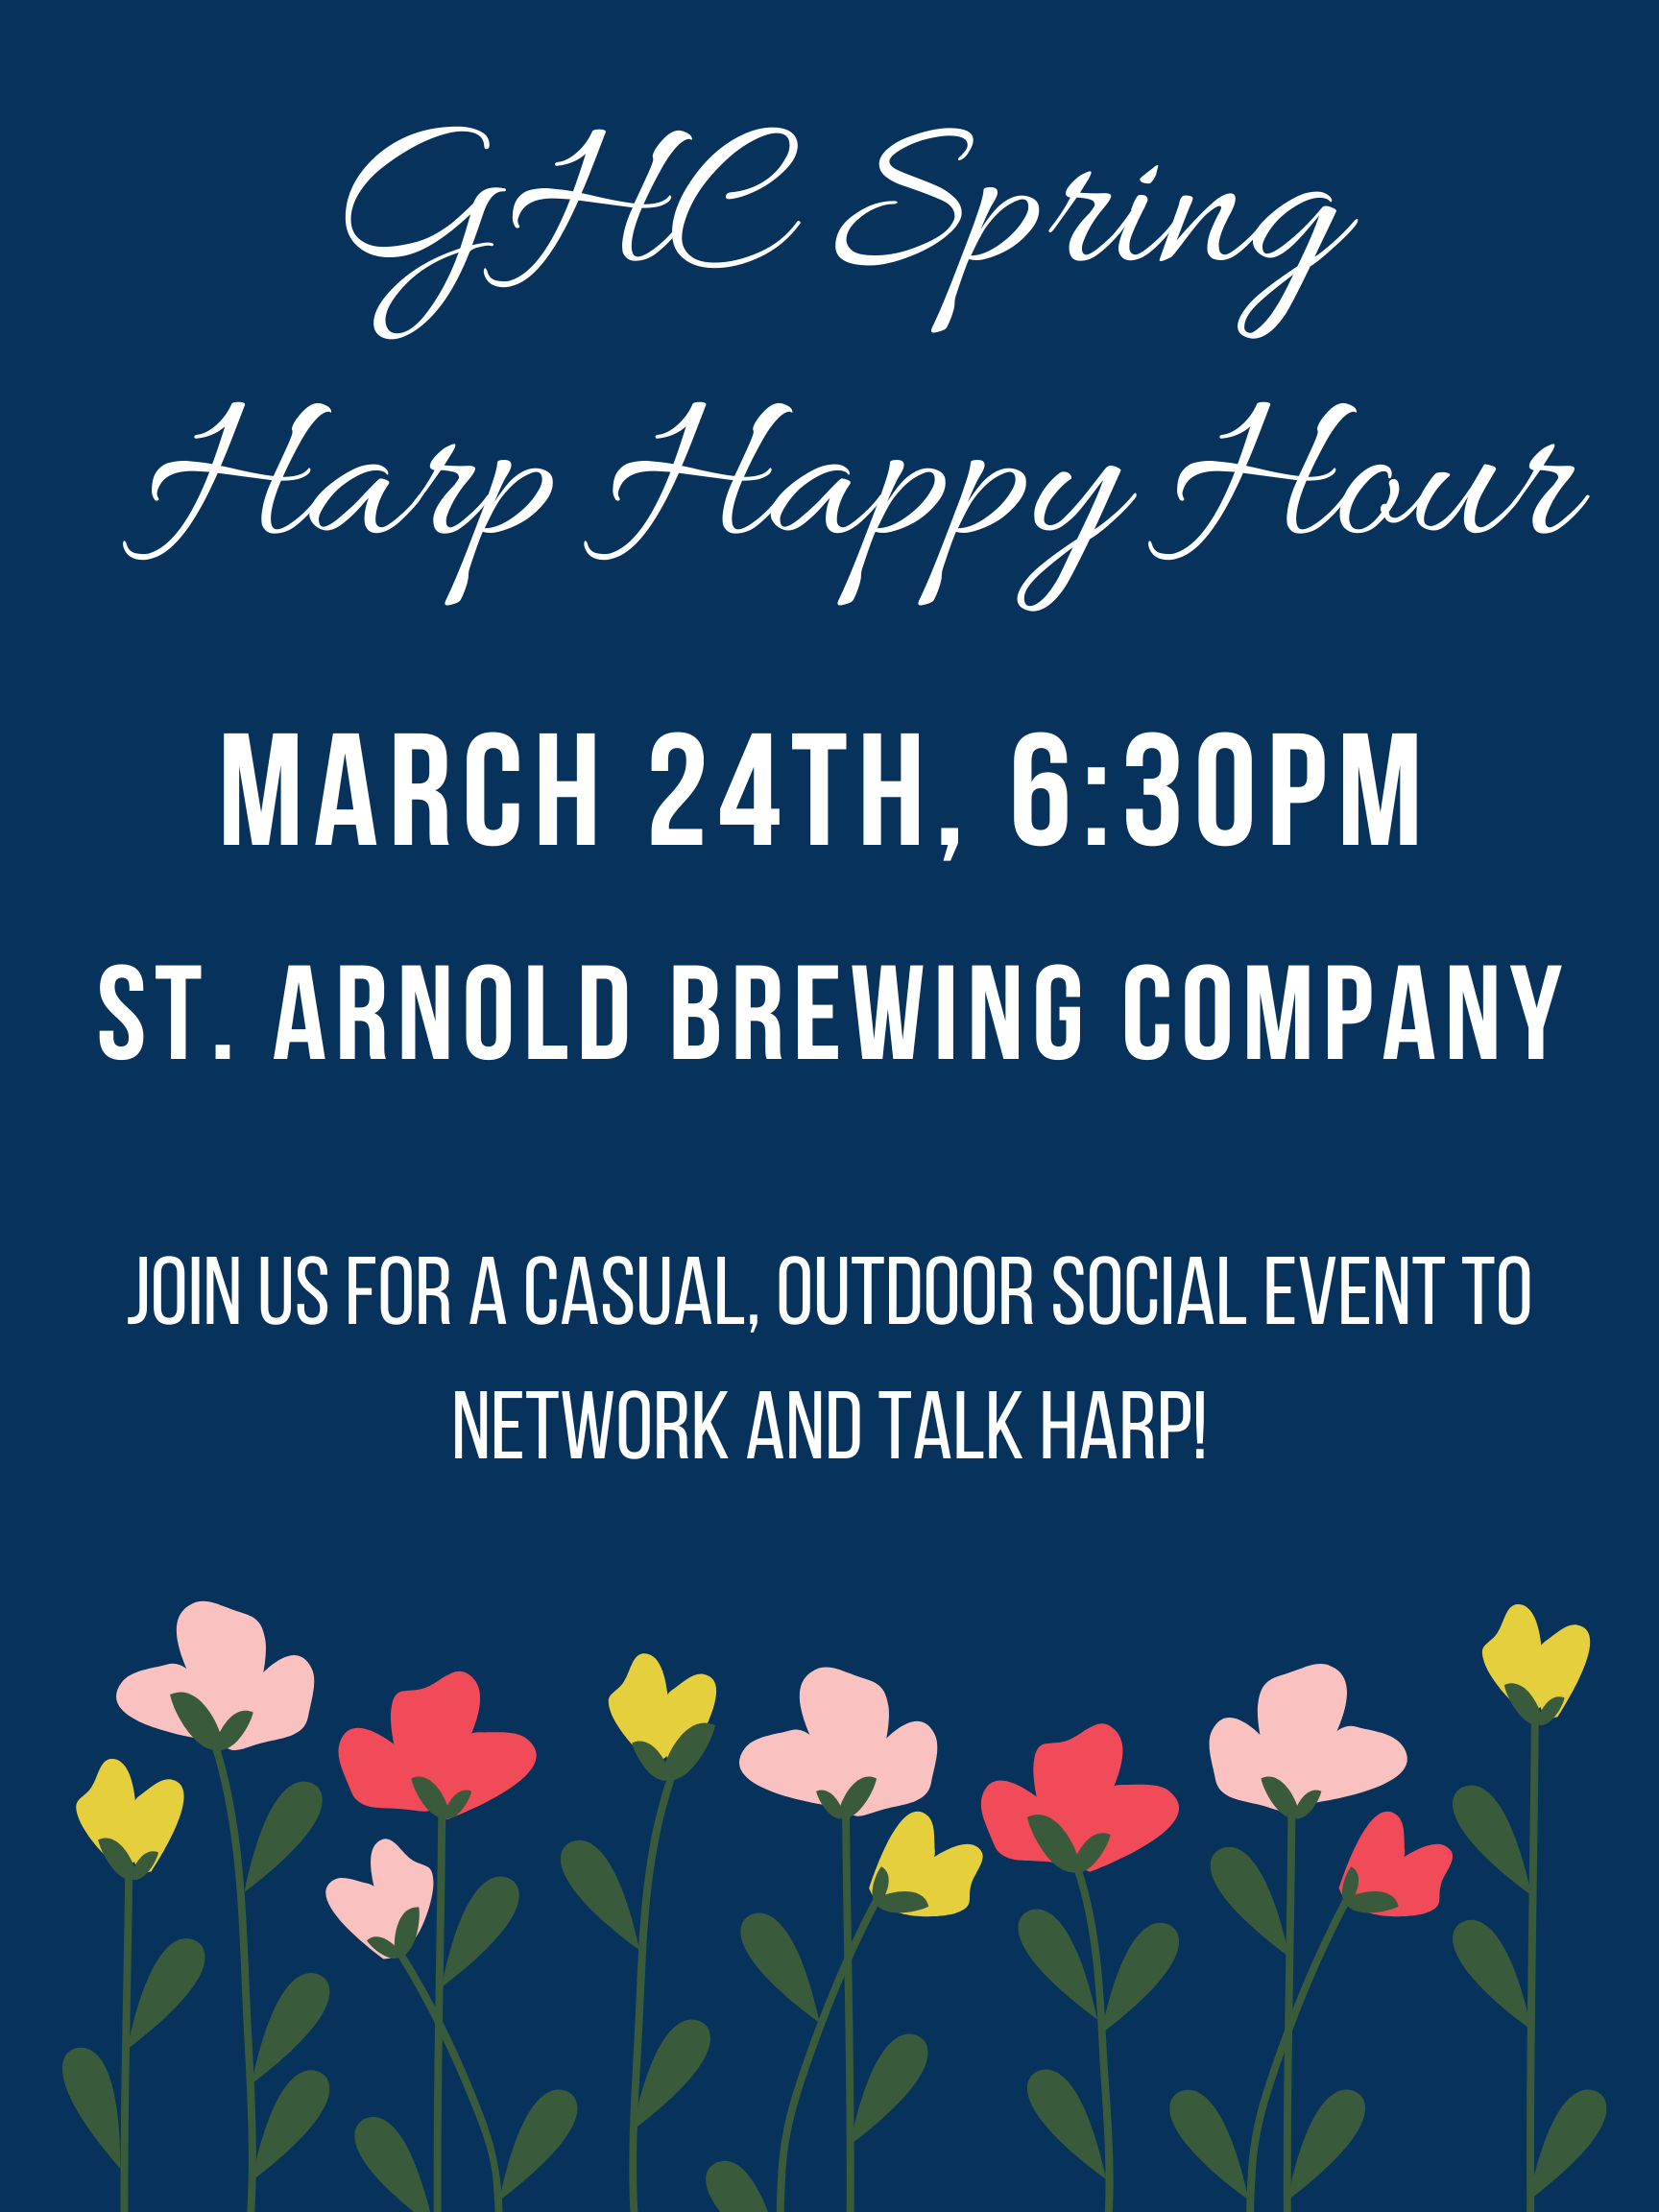 GHC Spring Harp Happy Hour